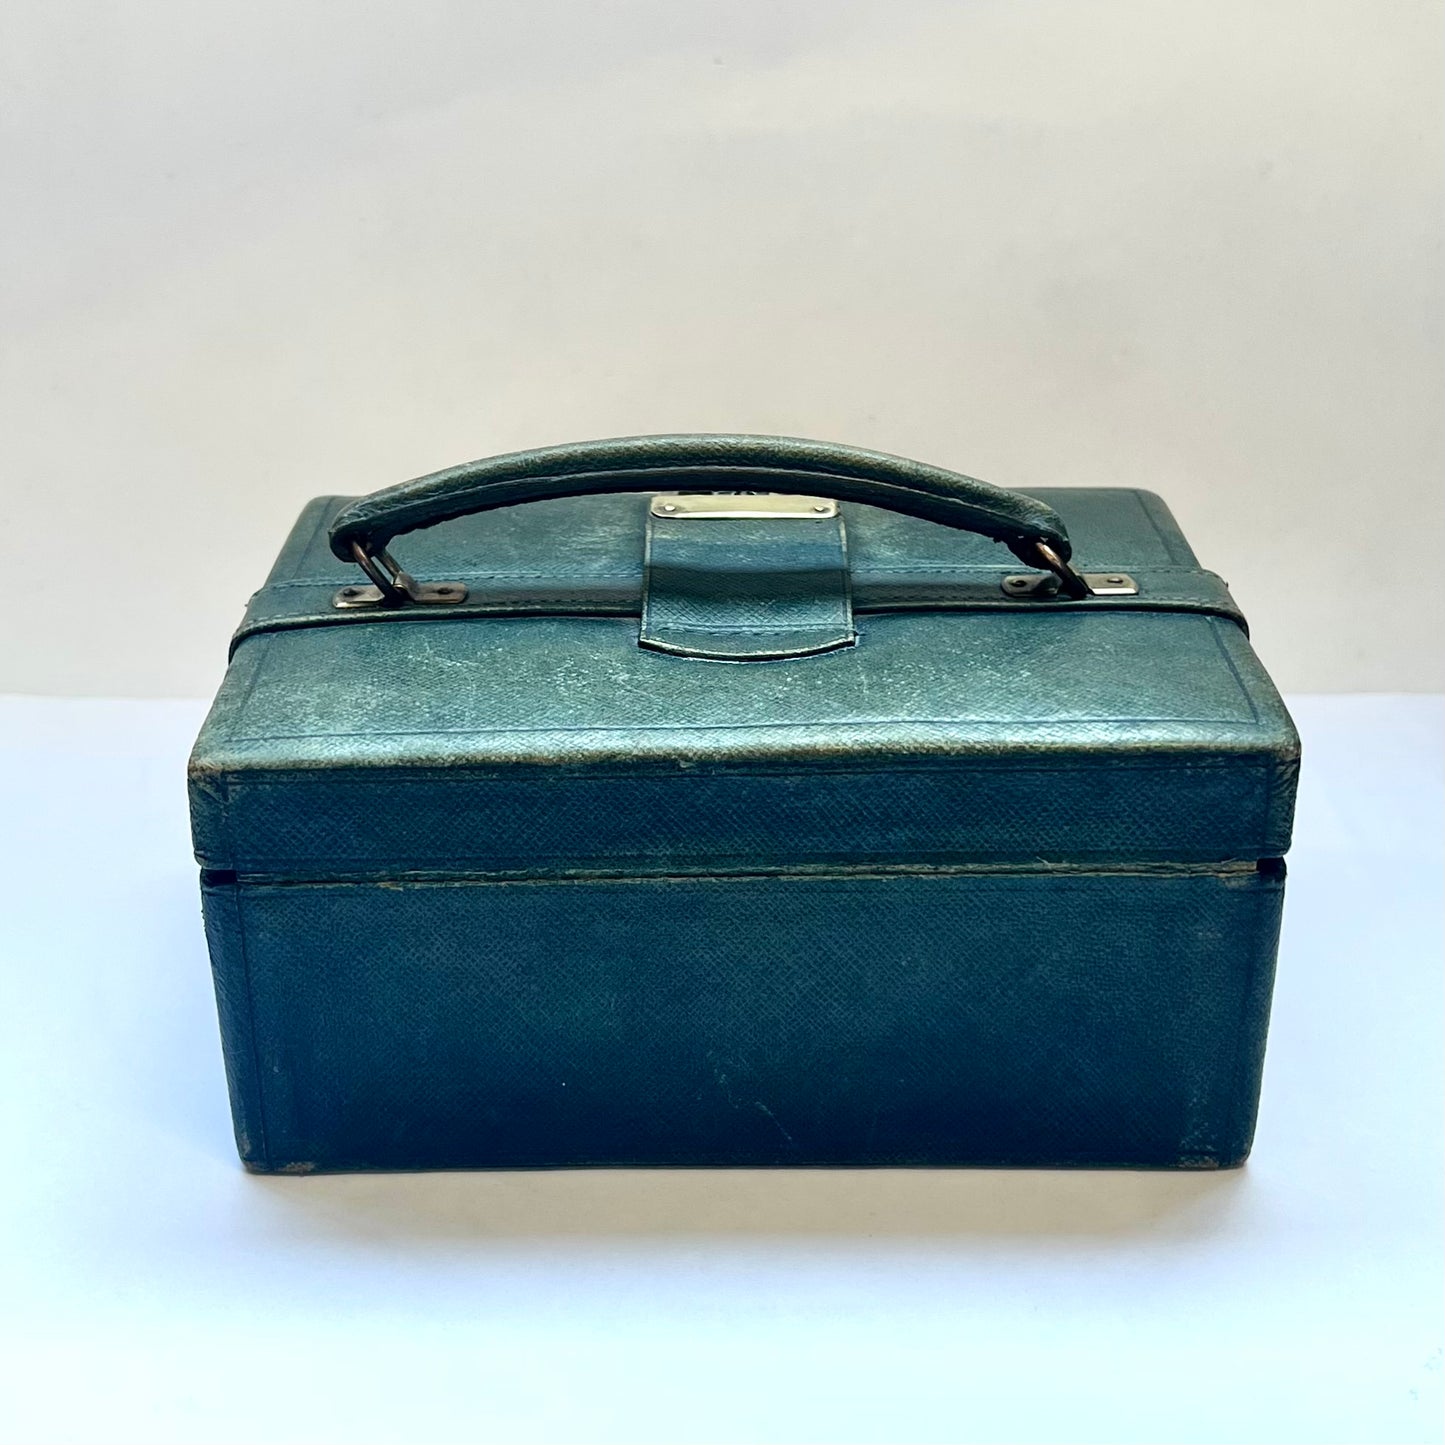 Late Victorian to Edwardian dark green leather clad jewellery box, top-handled with brass mechanism